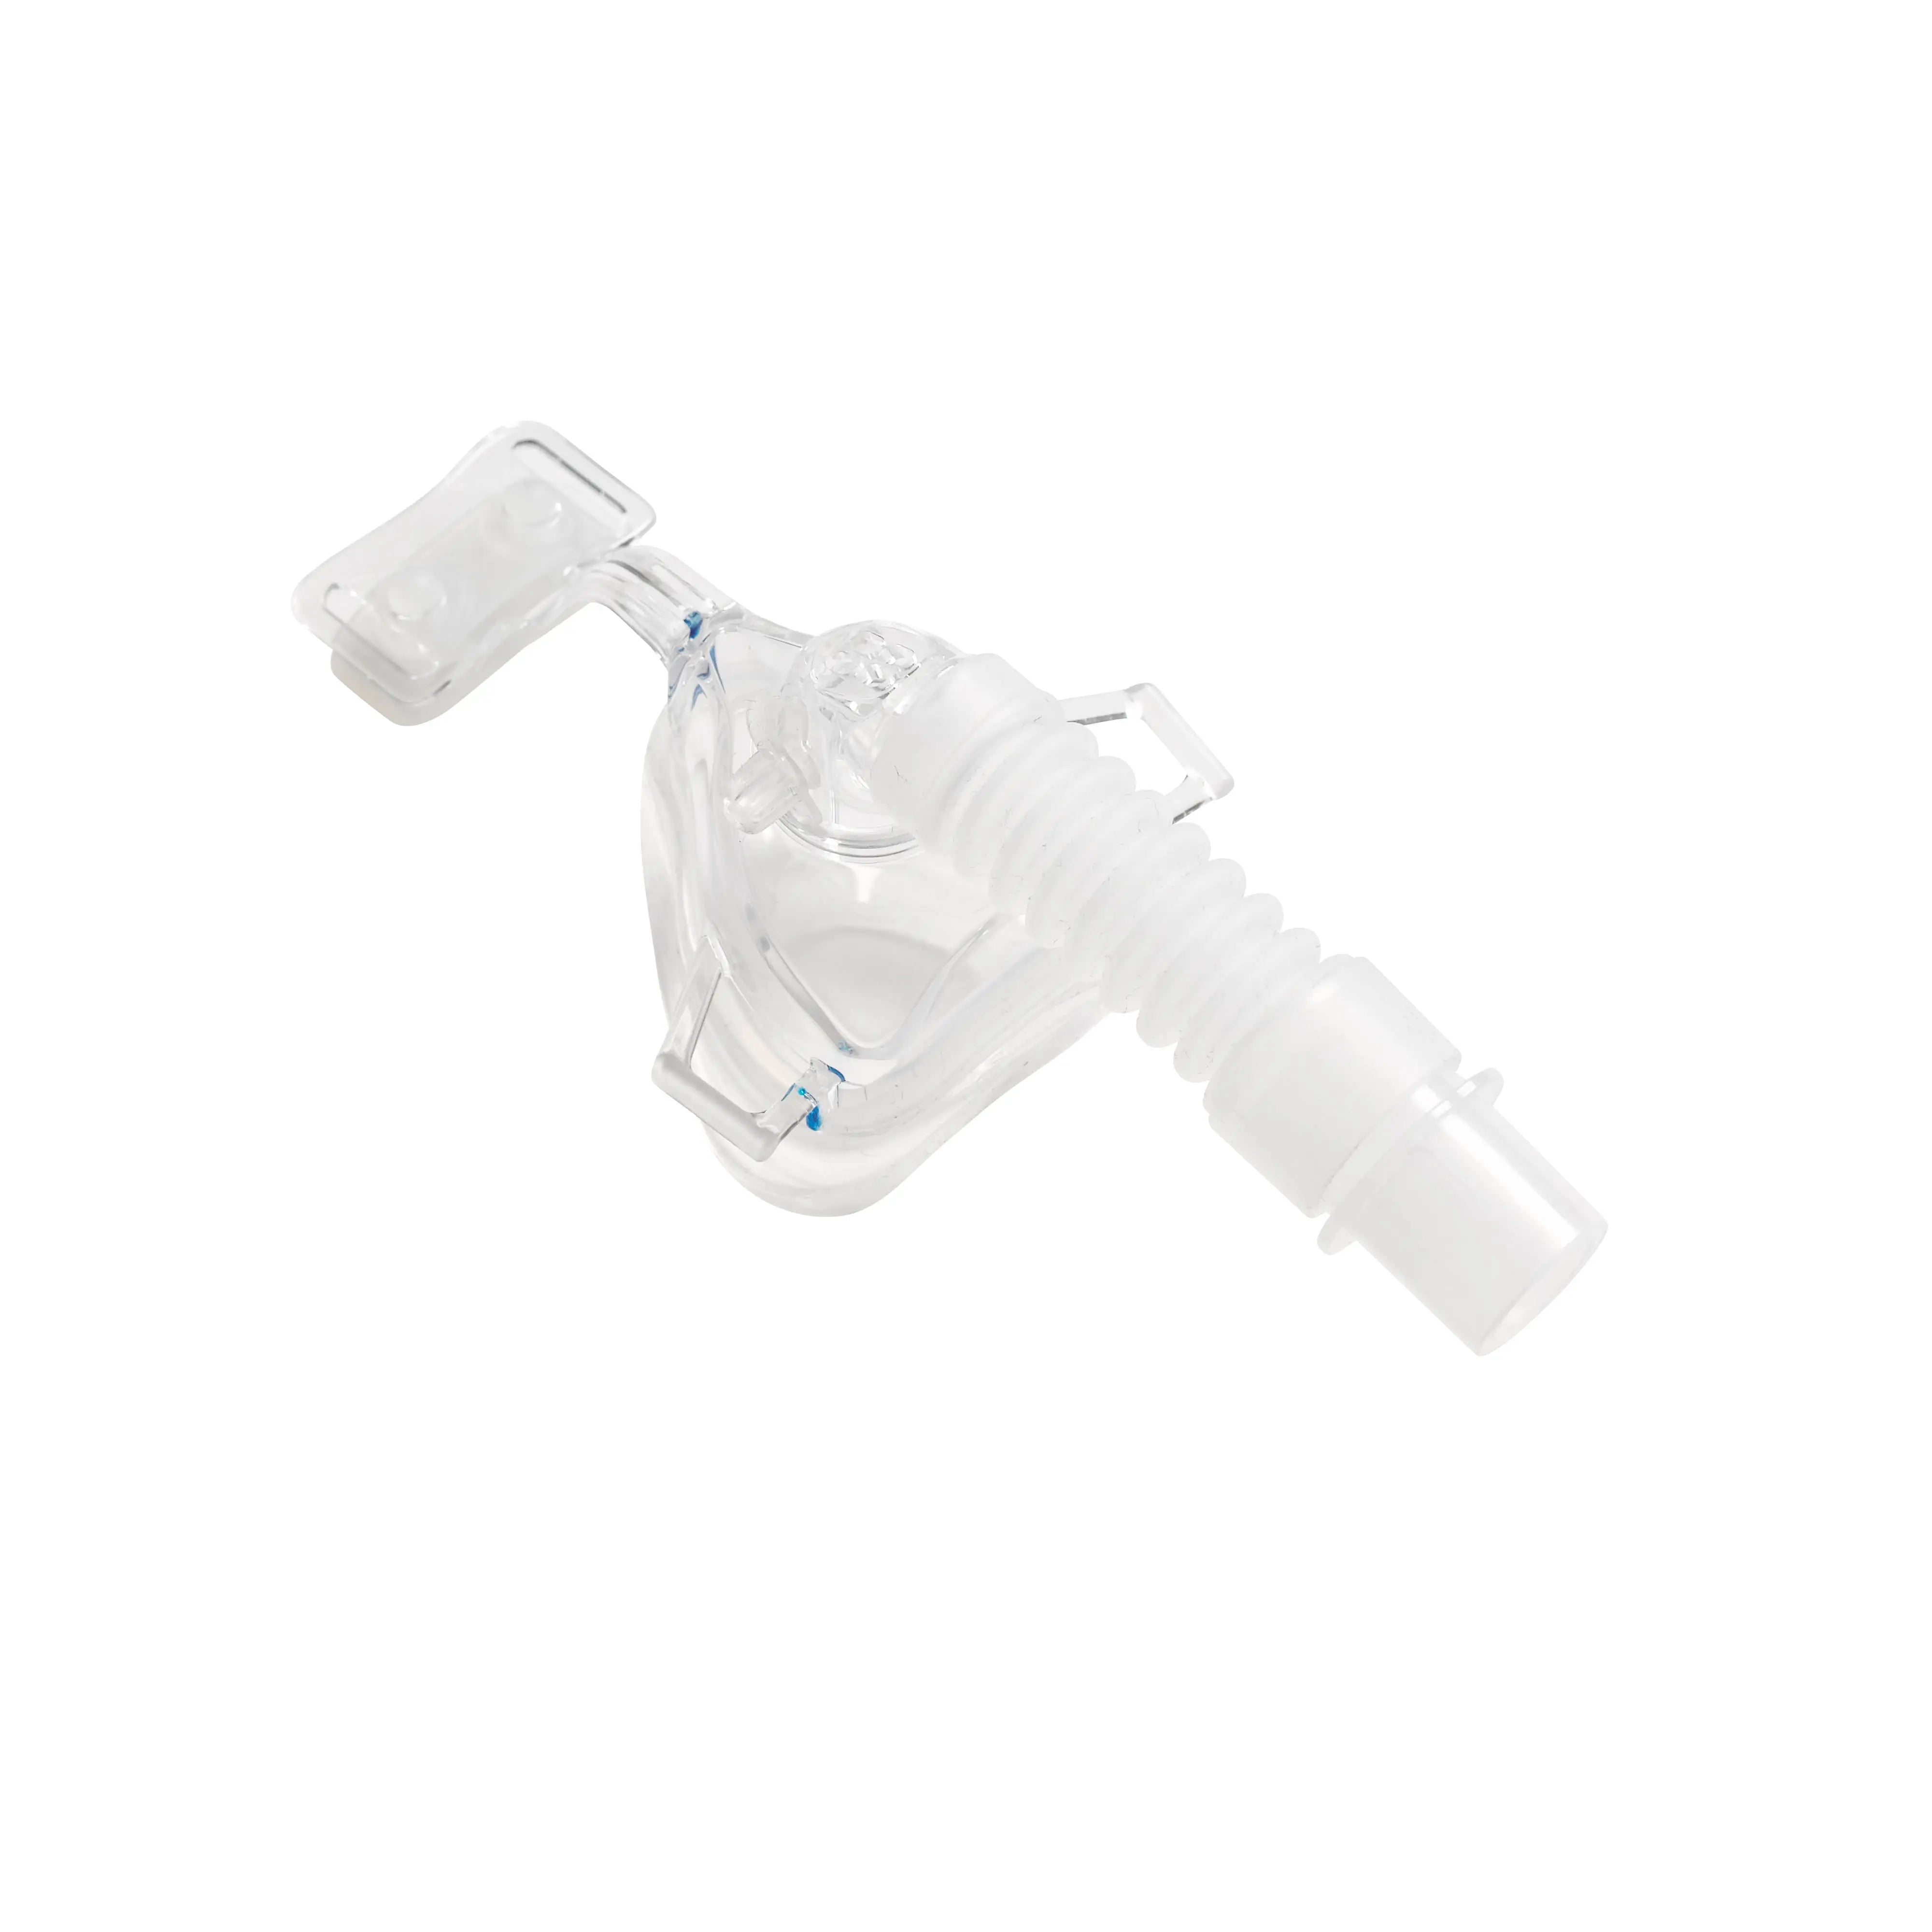 NasalFit Deluxe EZ CPAP Mask without Headgear